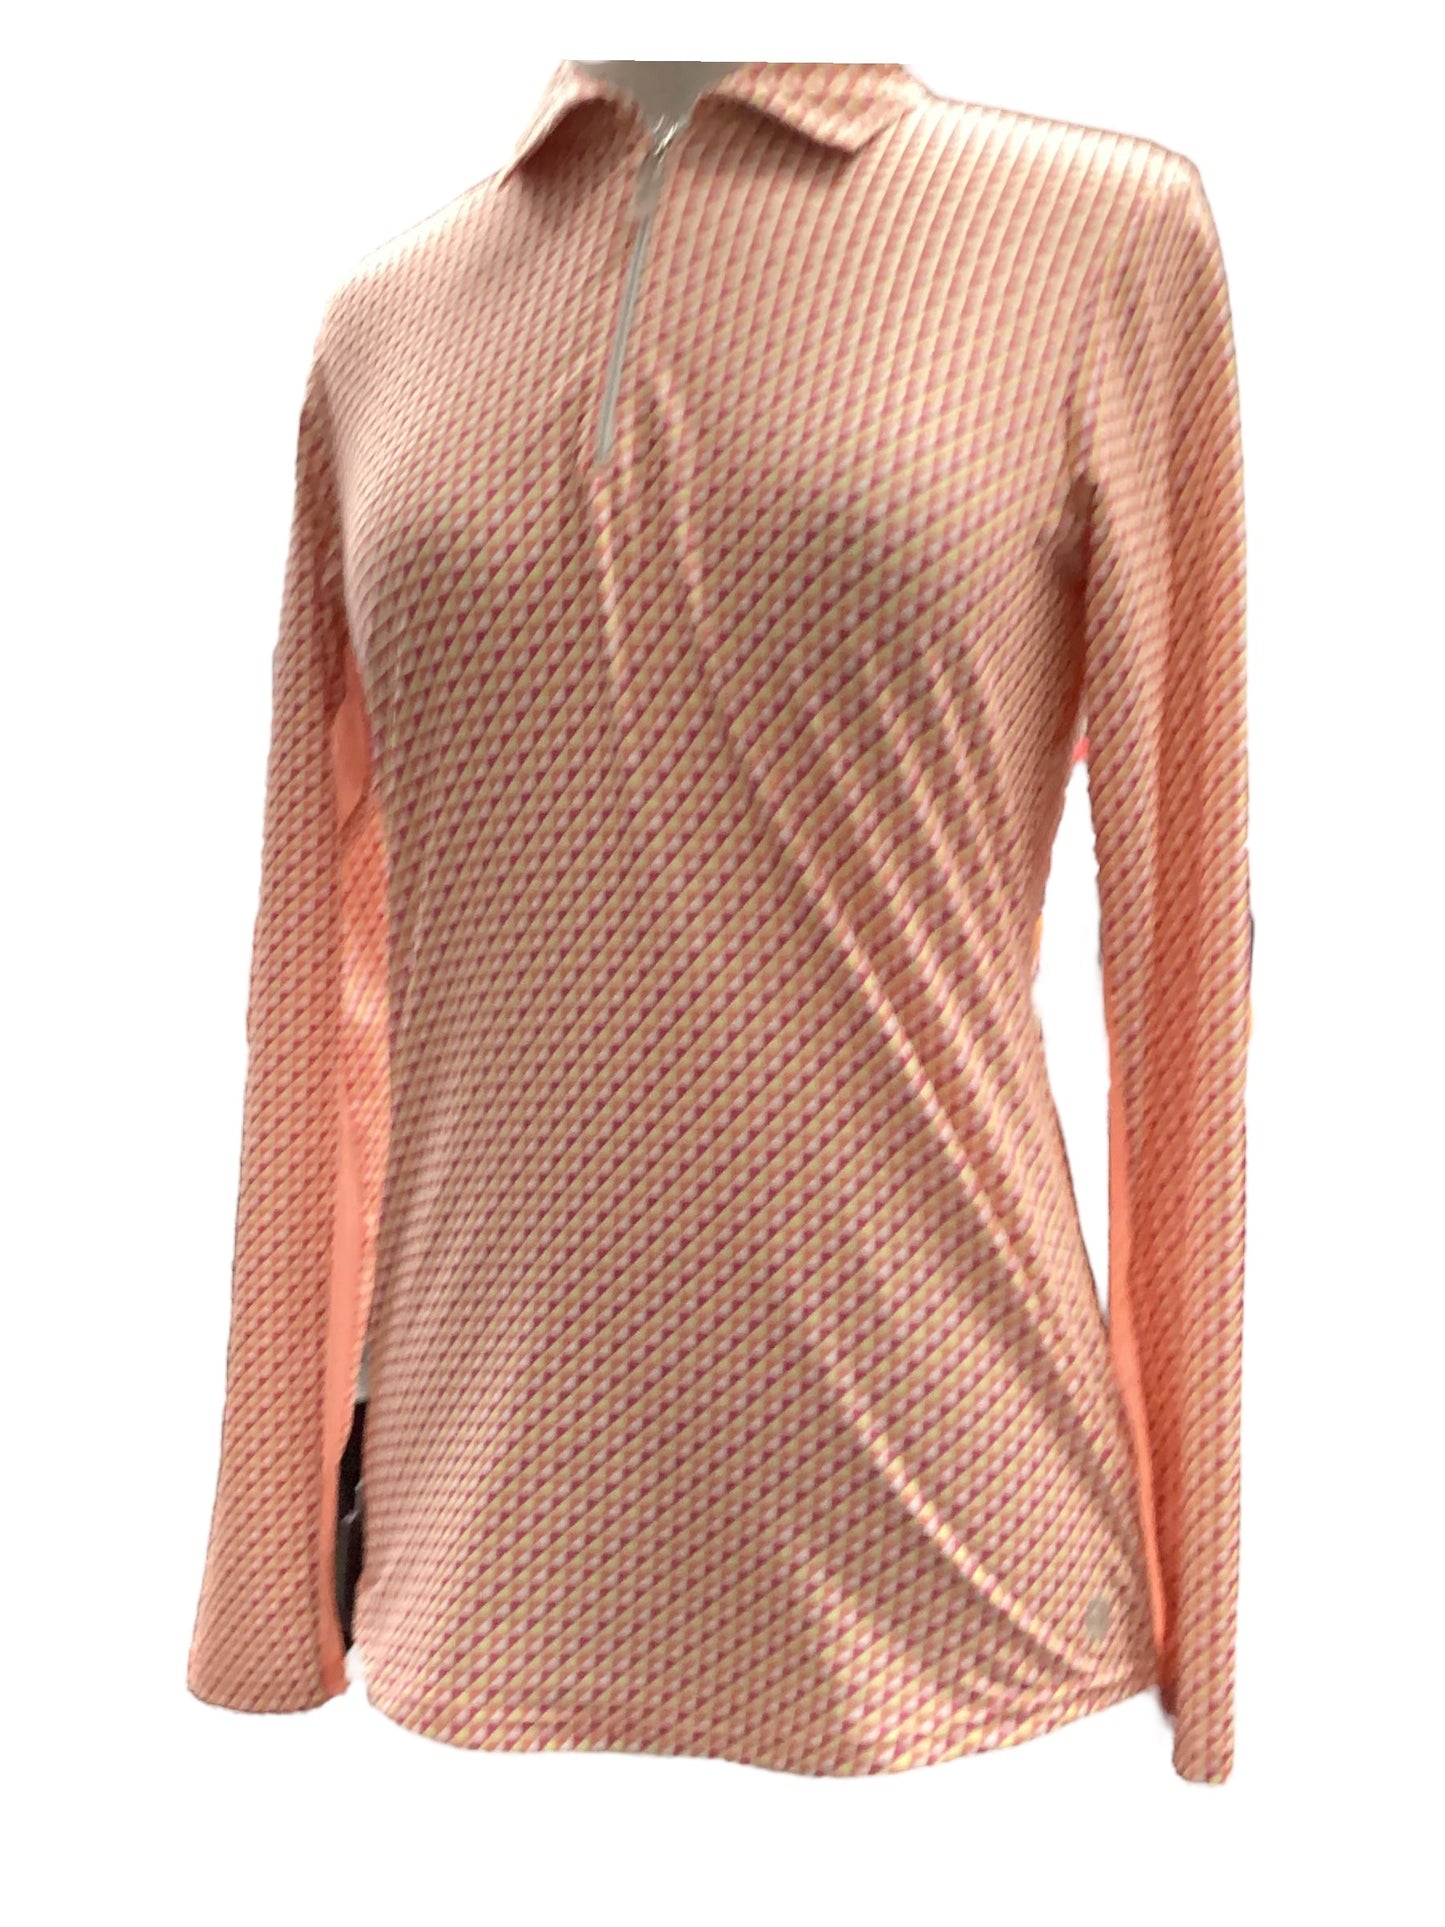 Multi-colored Athletic Top Long Sleeve Collar Bette And Court, Size Xs